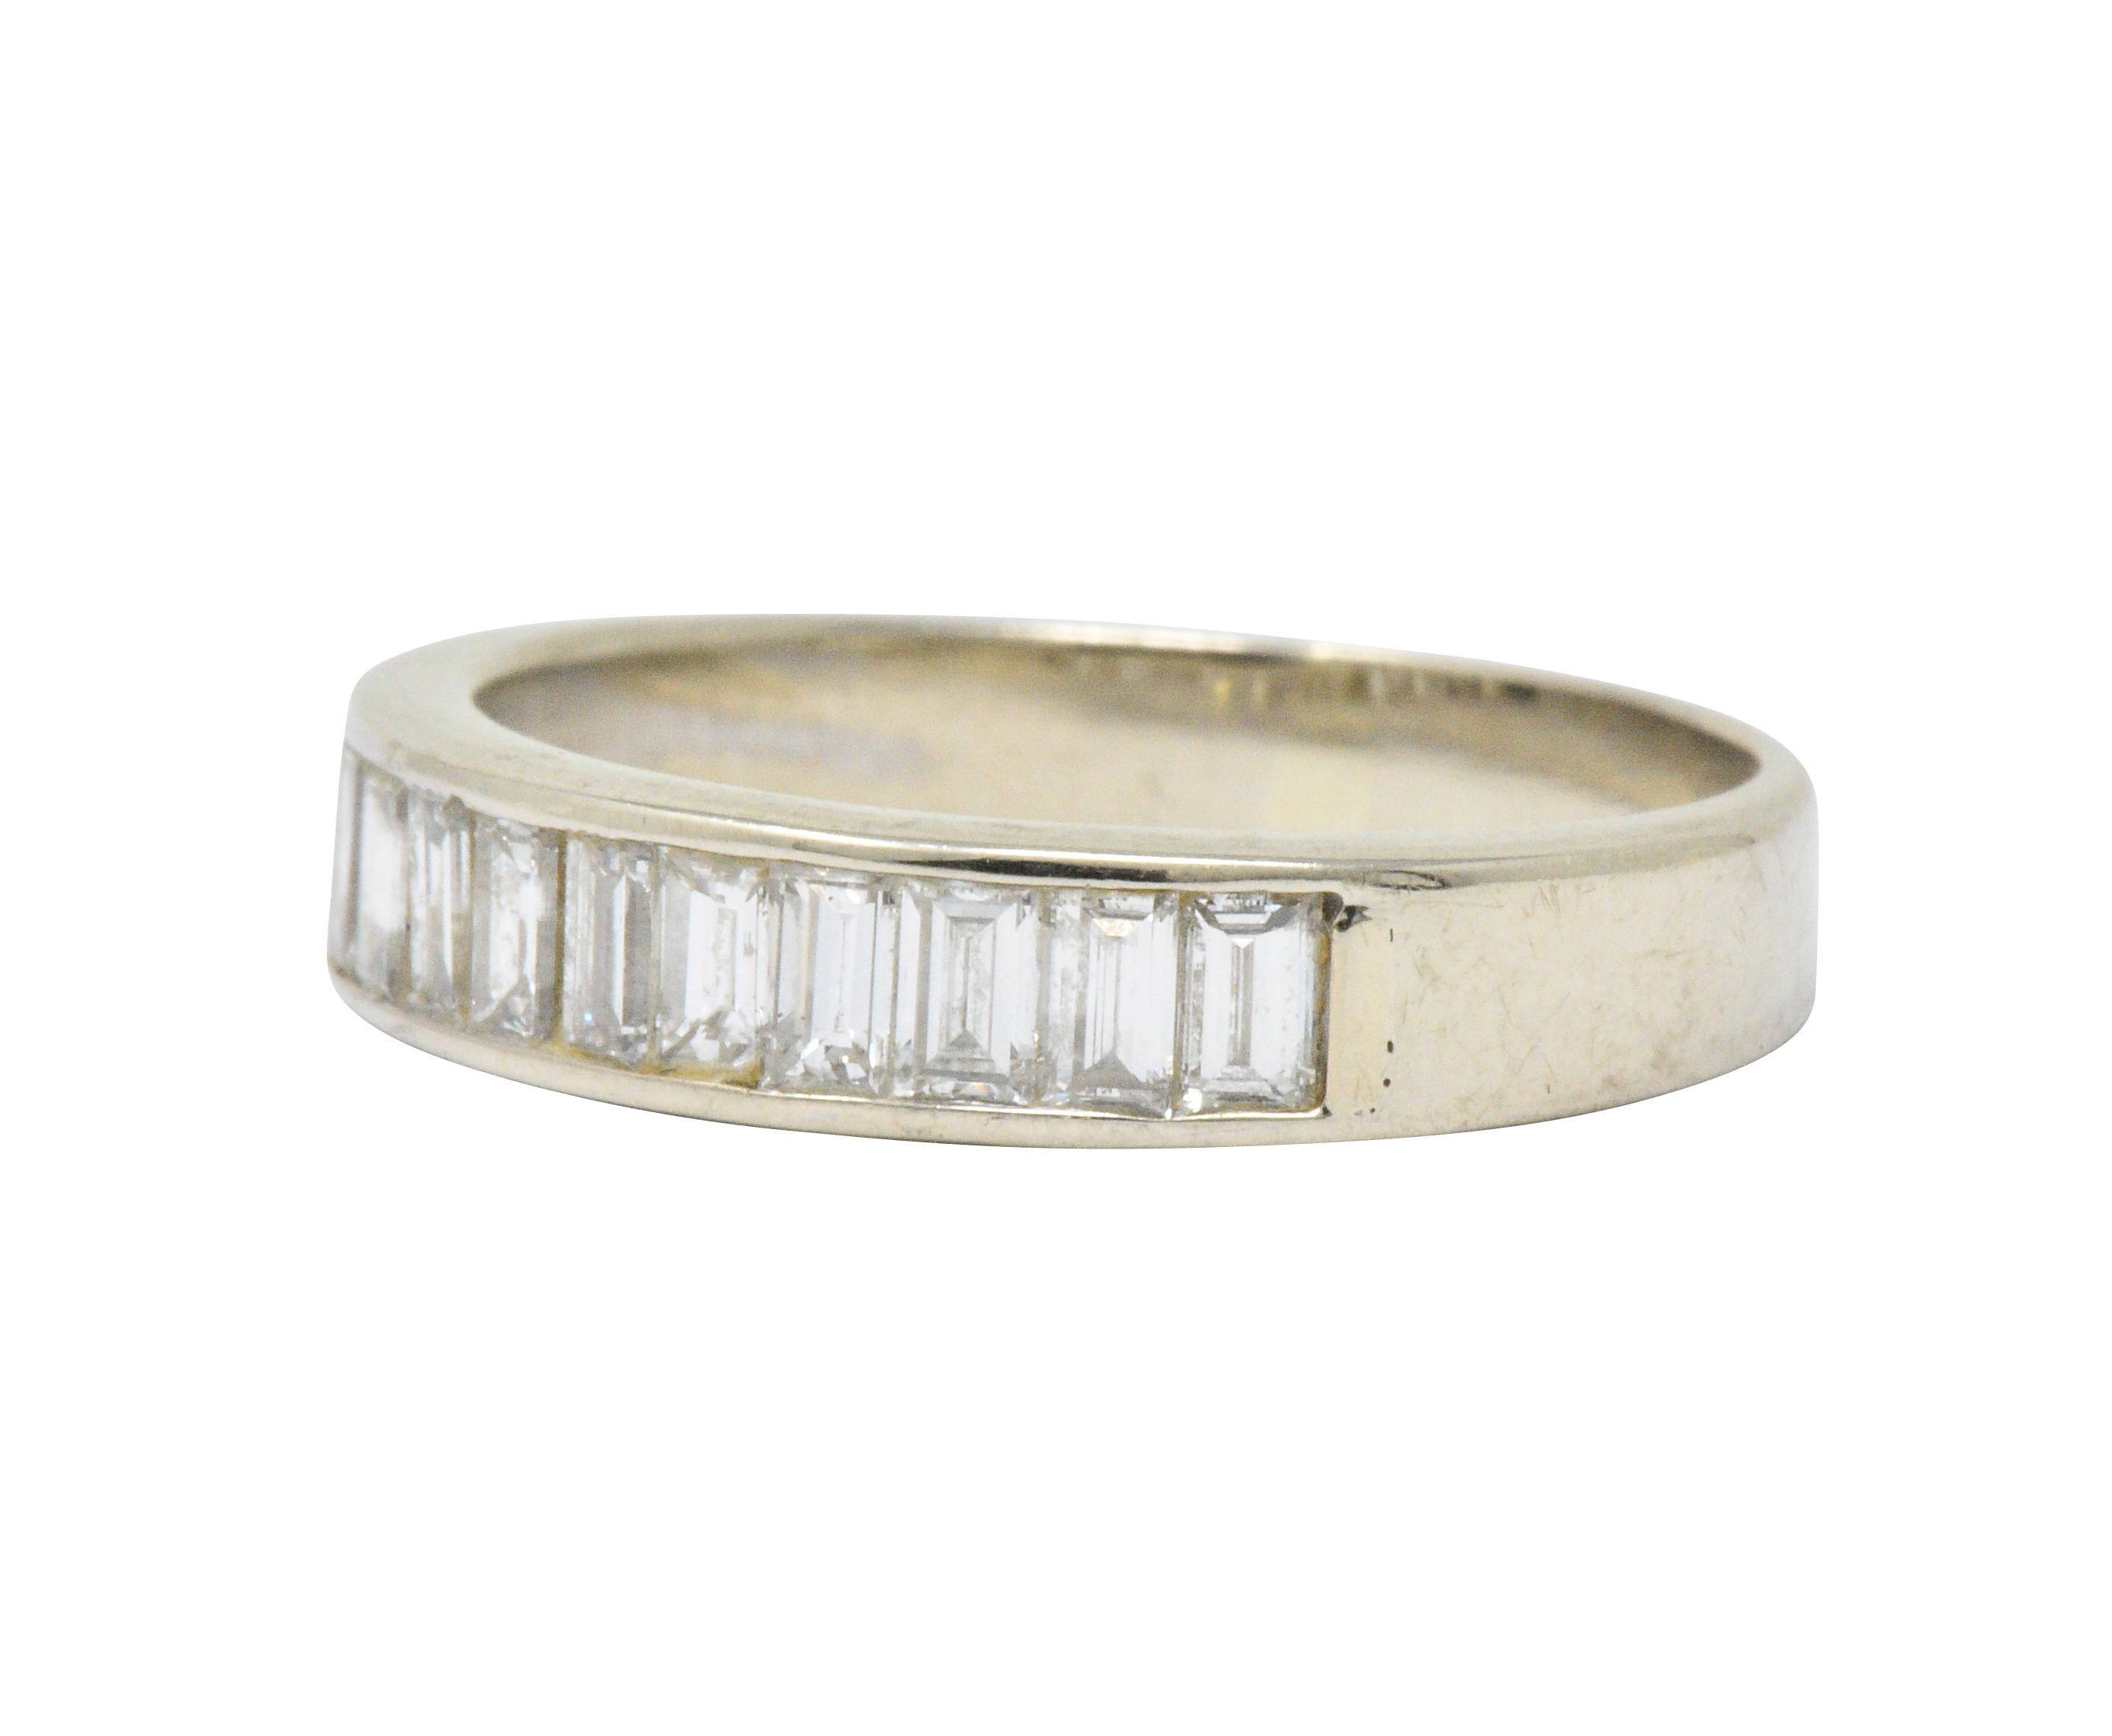 Band style ring channel set to front with baguette cut diamonds

Weighing approximately 1.00 carat total with G/H color and VS to SI clarity (mostly VS)

Tested as 14 karat white gold

Circa: 2000s

Ring size: 8 1/2 & sizable

Measures: 4.6 mm wide